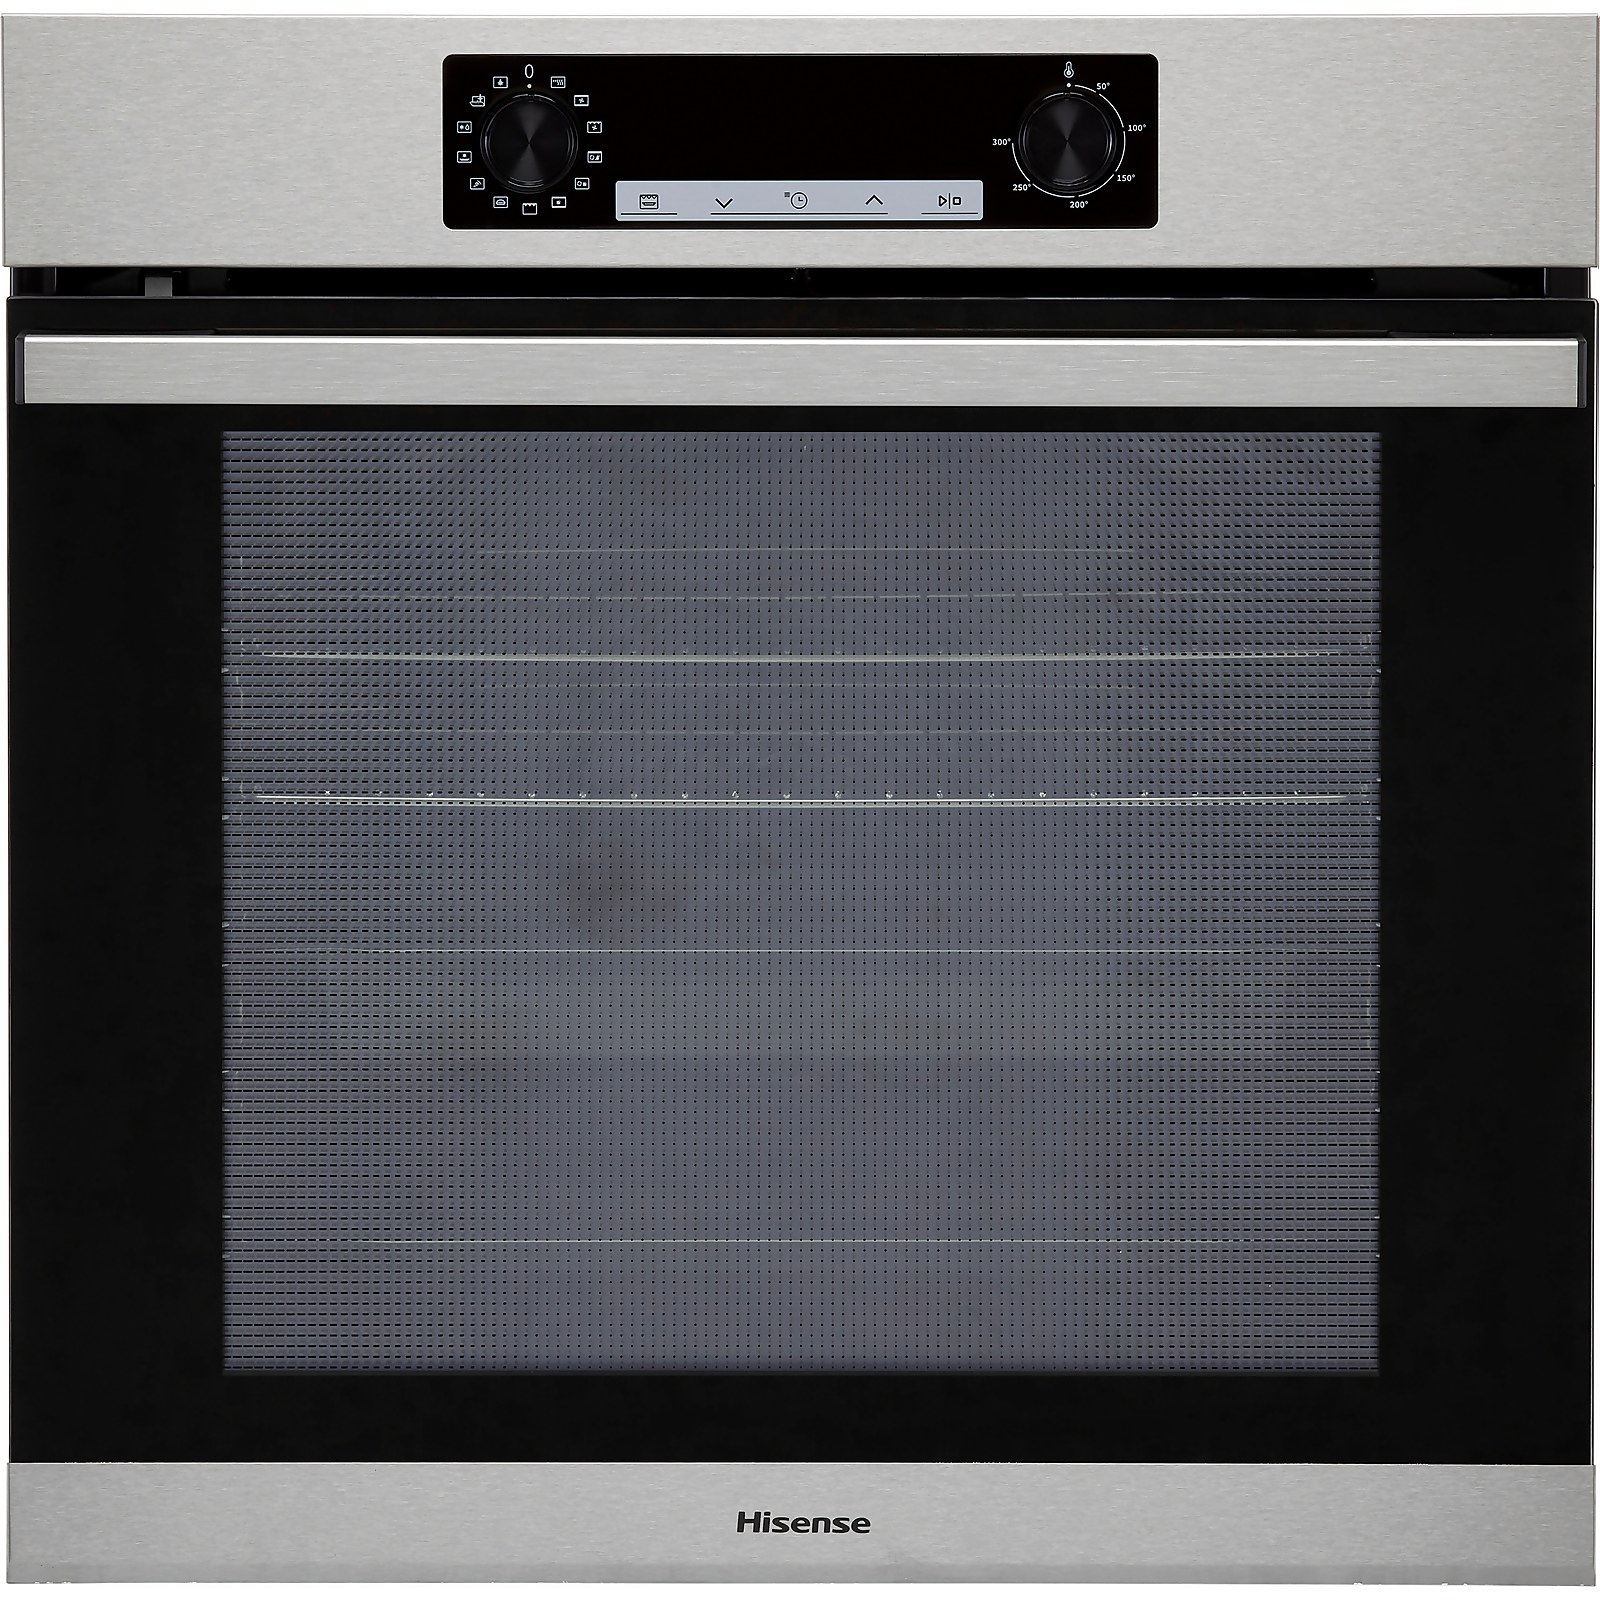 Photo of Hisense Bsa65222pxuk Built In Electric Single Oven - Stainless Steel